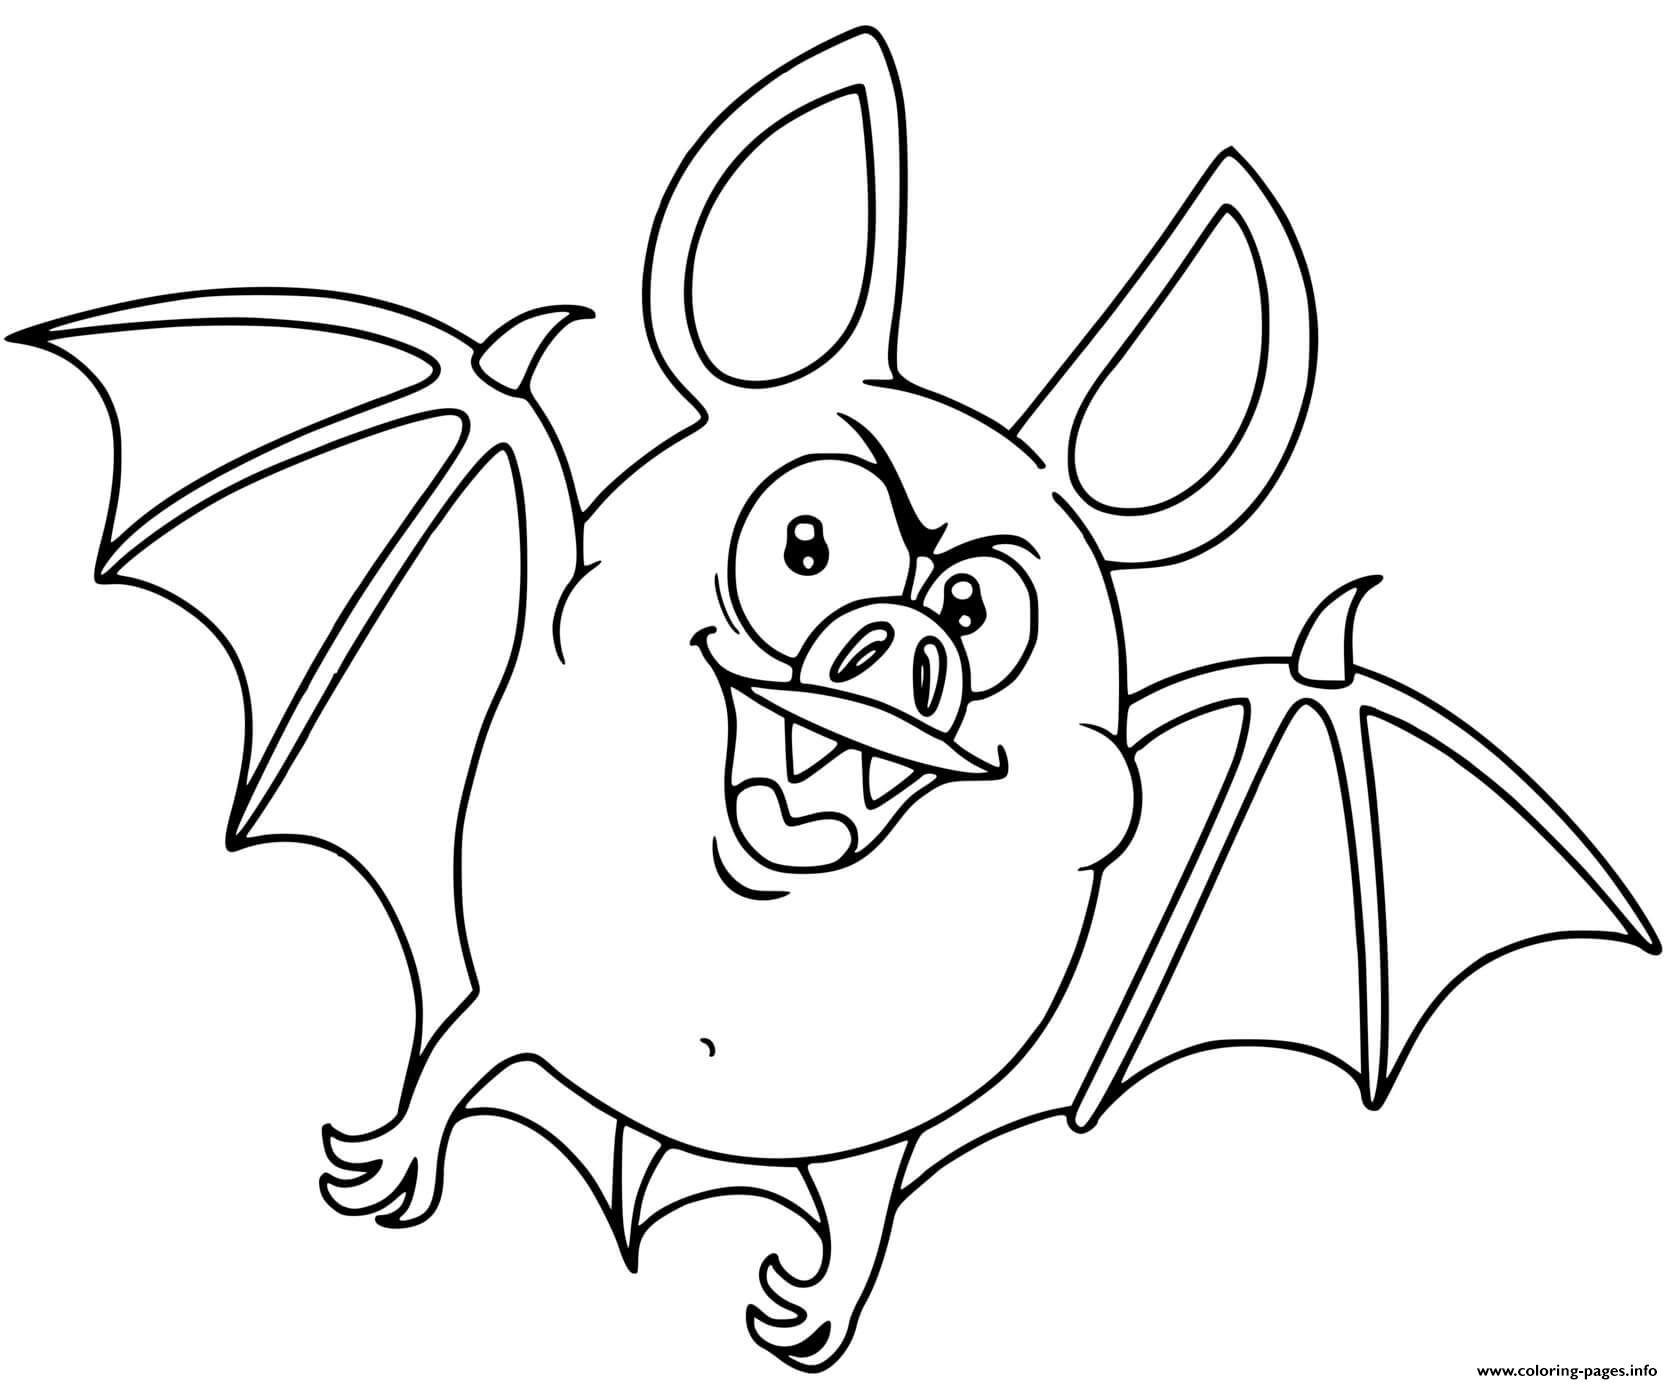 Vampire Bat coloring pages